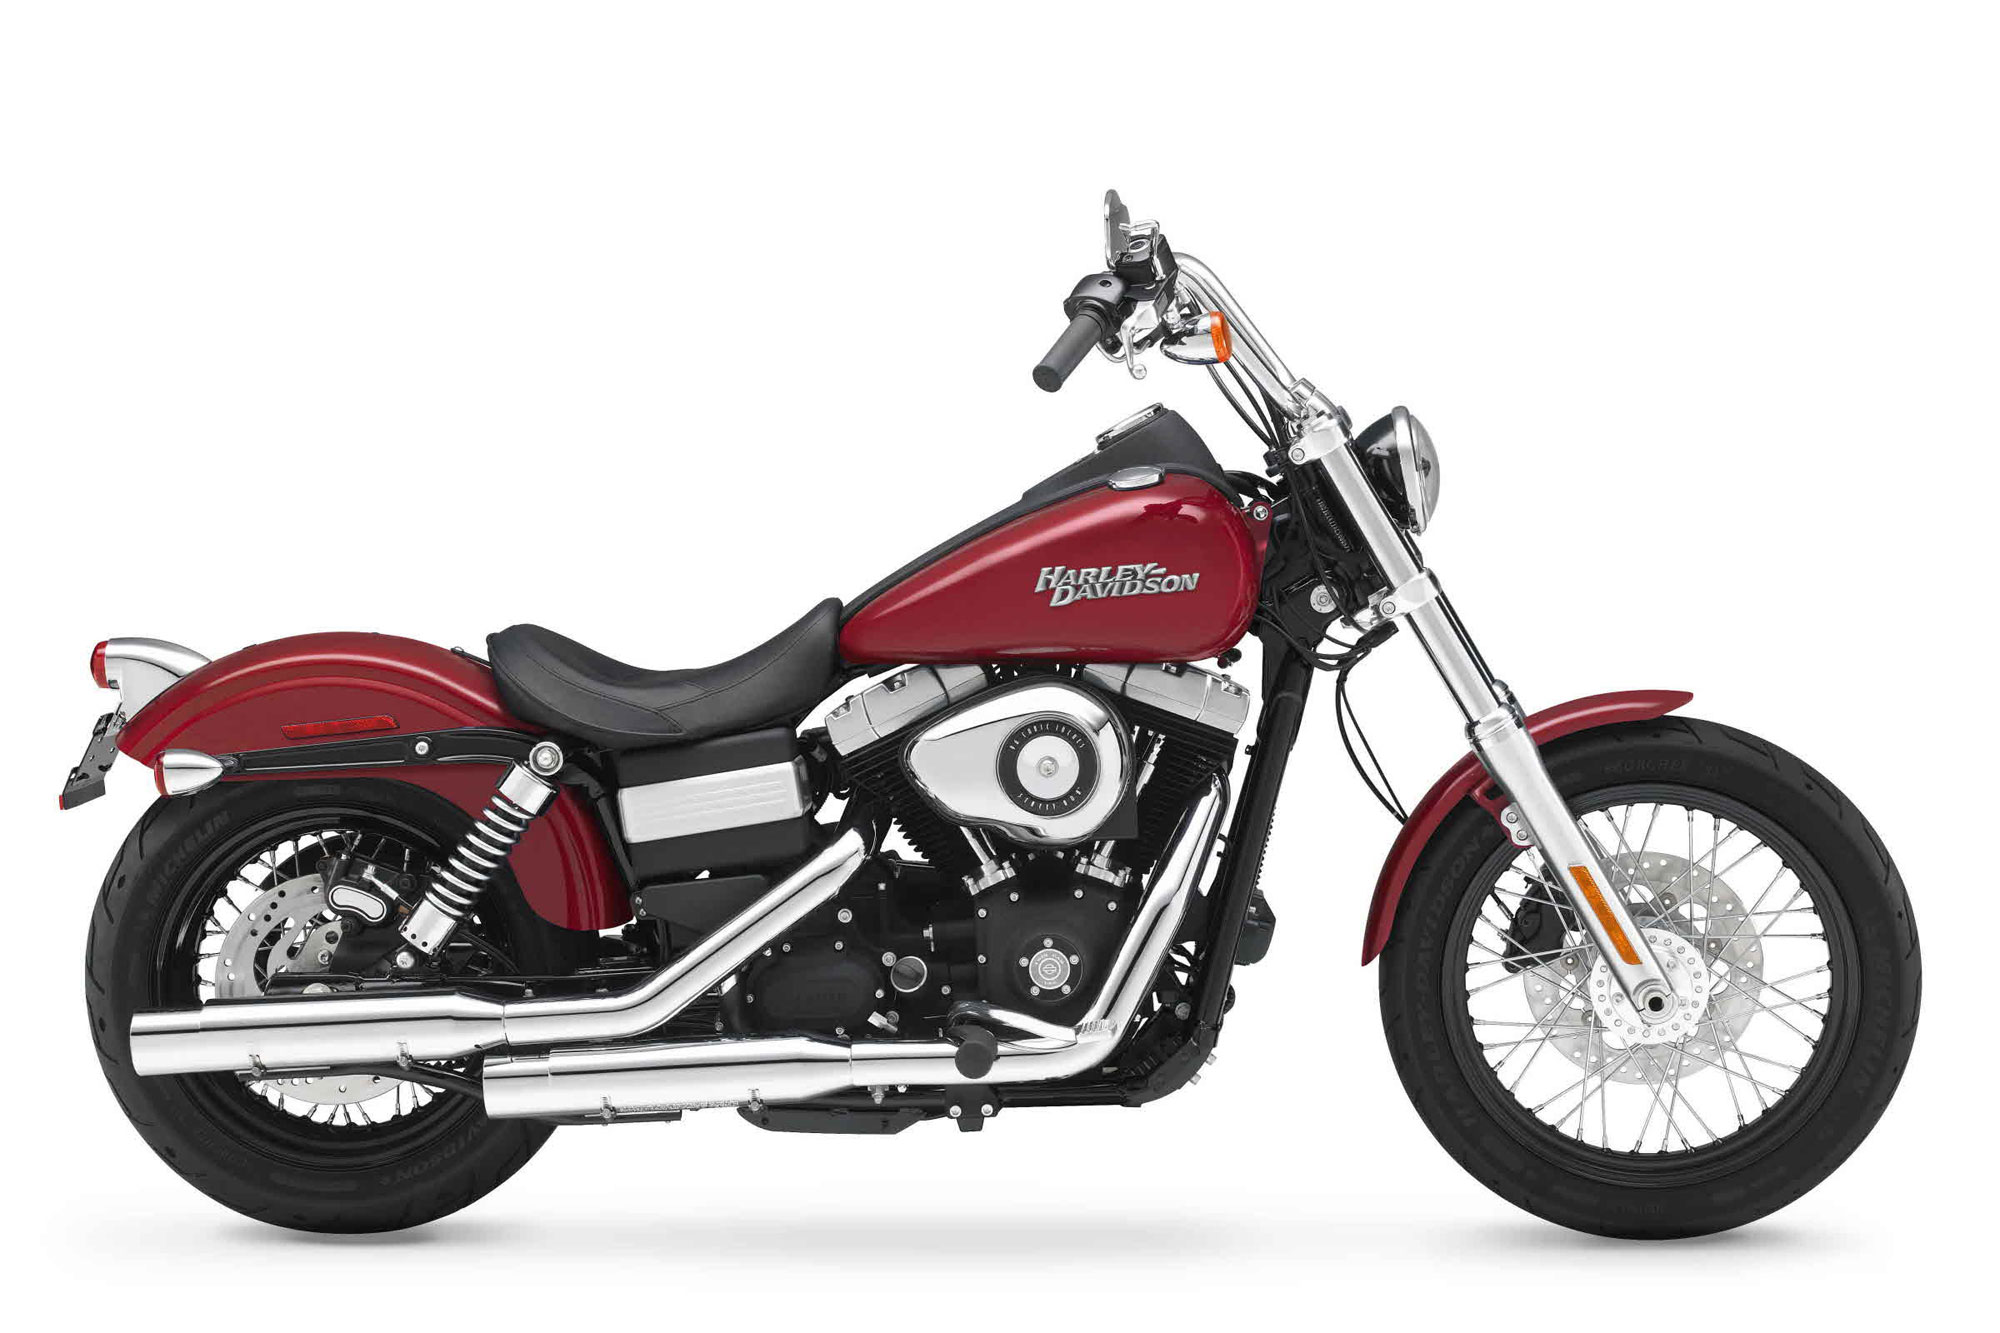 Inspiration Friday: Top 10 Harley-Davidson Engines • Total Motorcycle